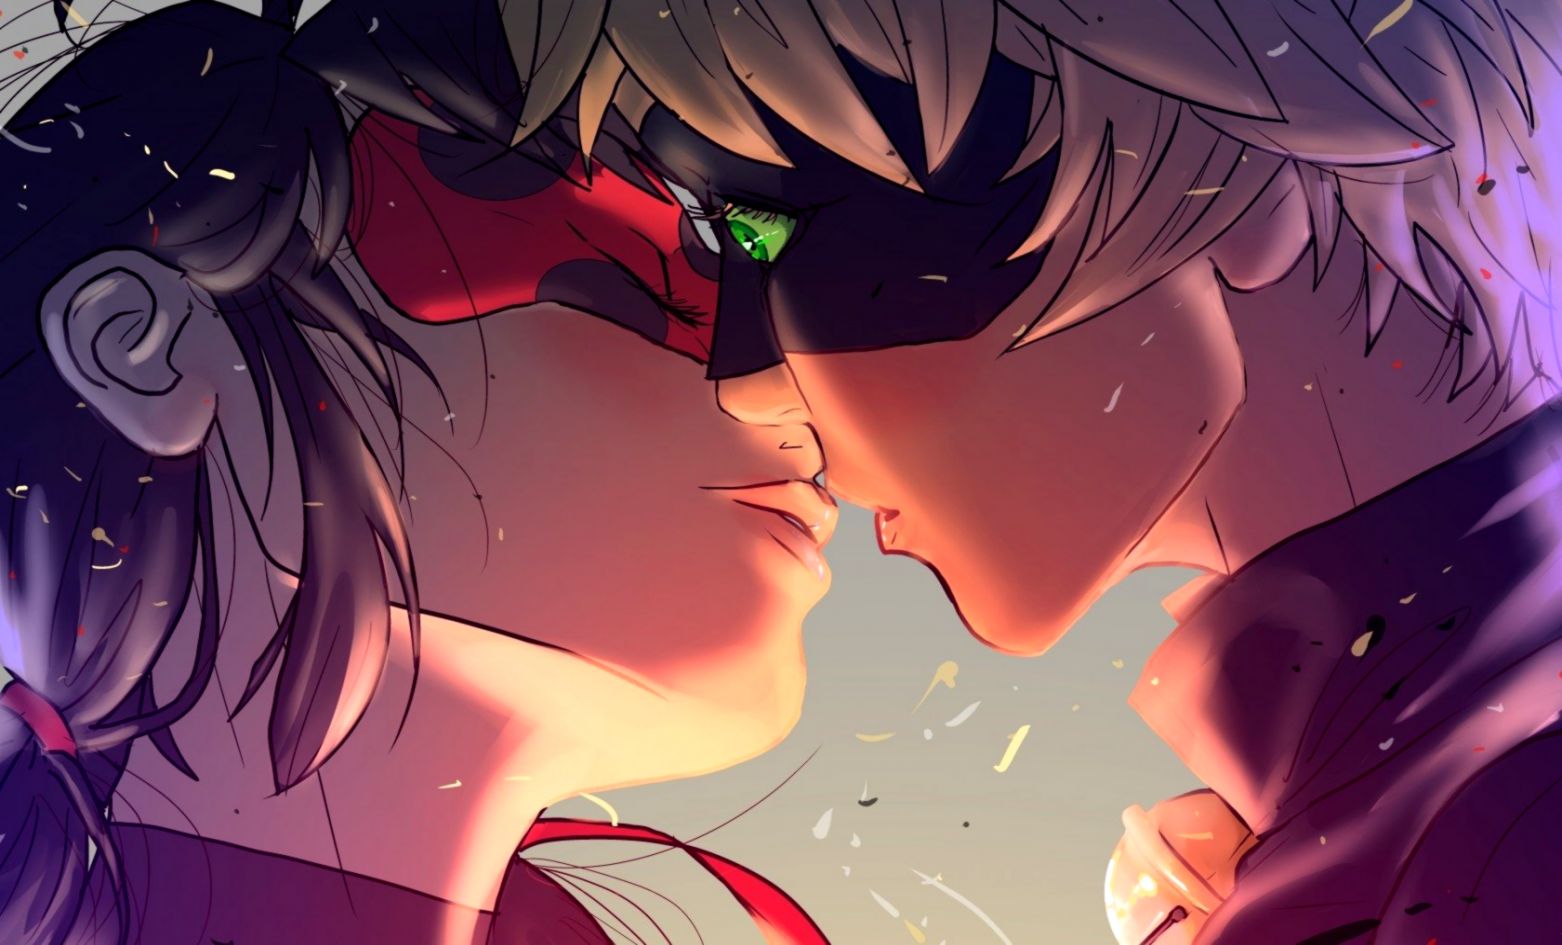 18 Miraculous Ladybug Hd Wallpapers Background Images - Miraculous Marinette And Adrien Kiss - HD Wallpaper 